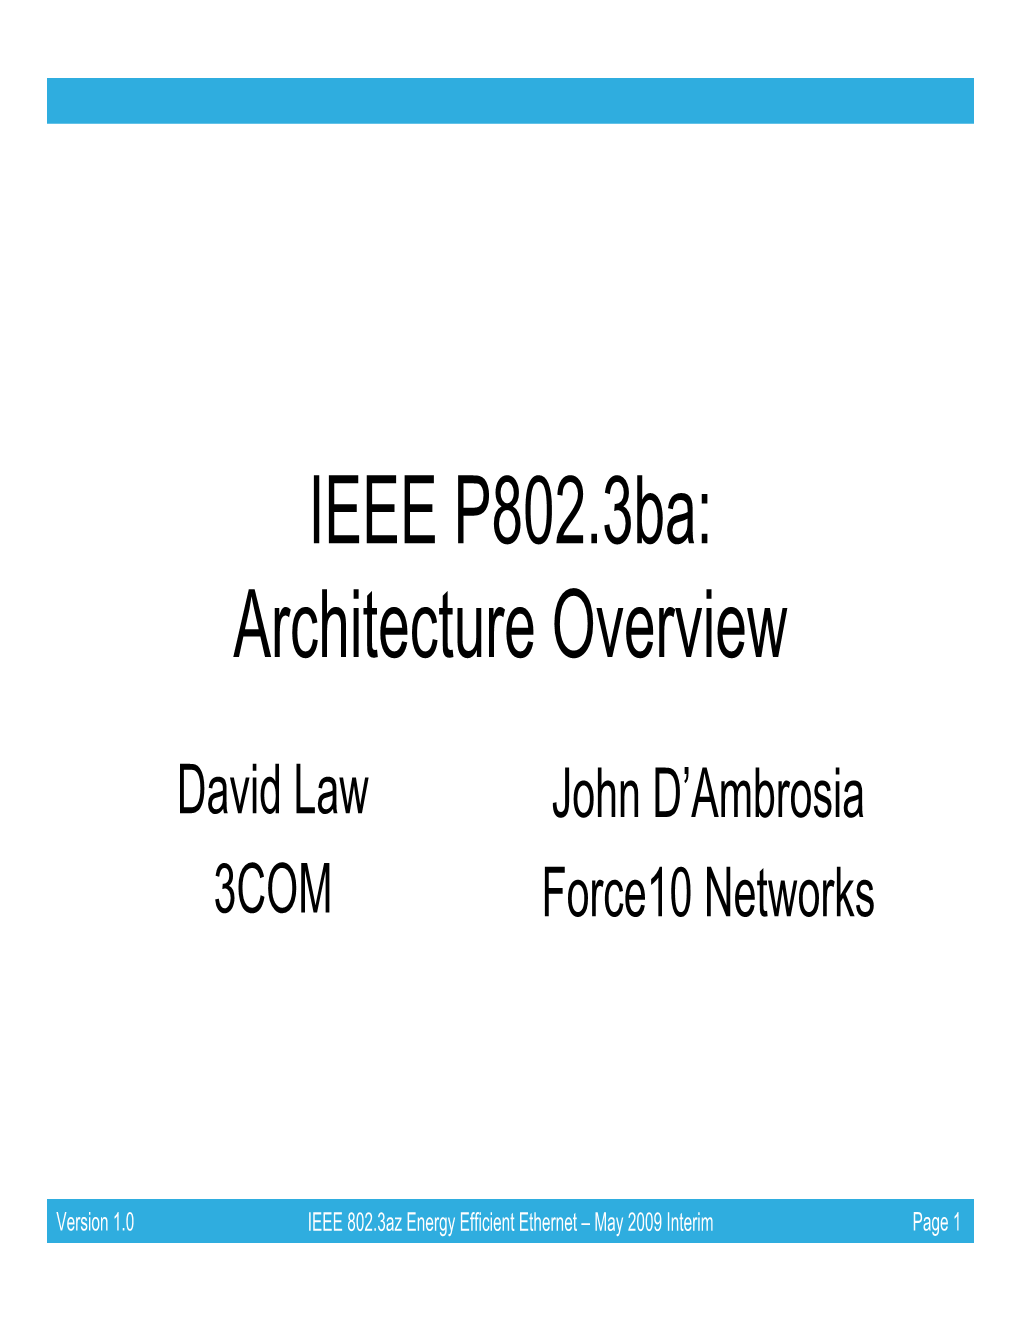 IEEE P802.3Ba: Architecture Overview